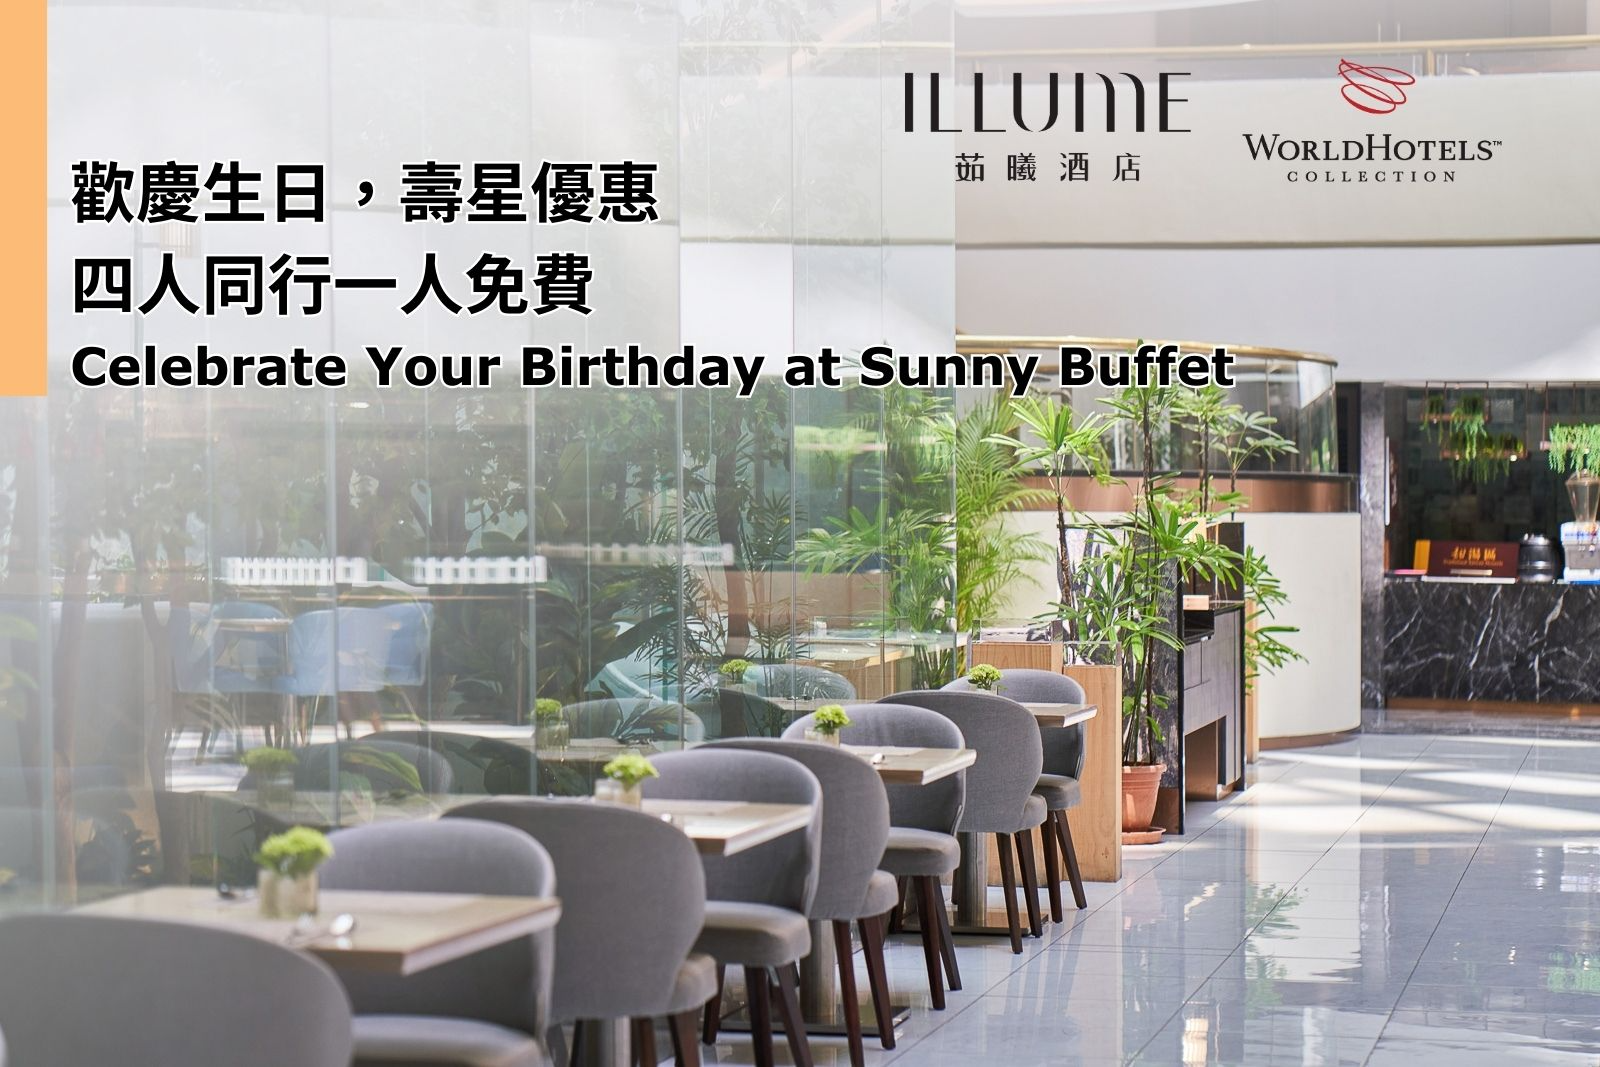 Celebrate your birthday with Sunny Buffet’s exceptional deal!